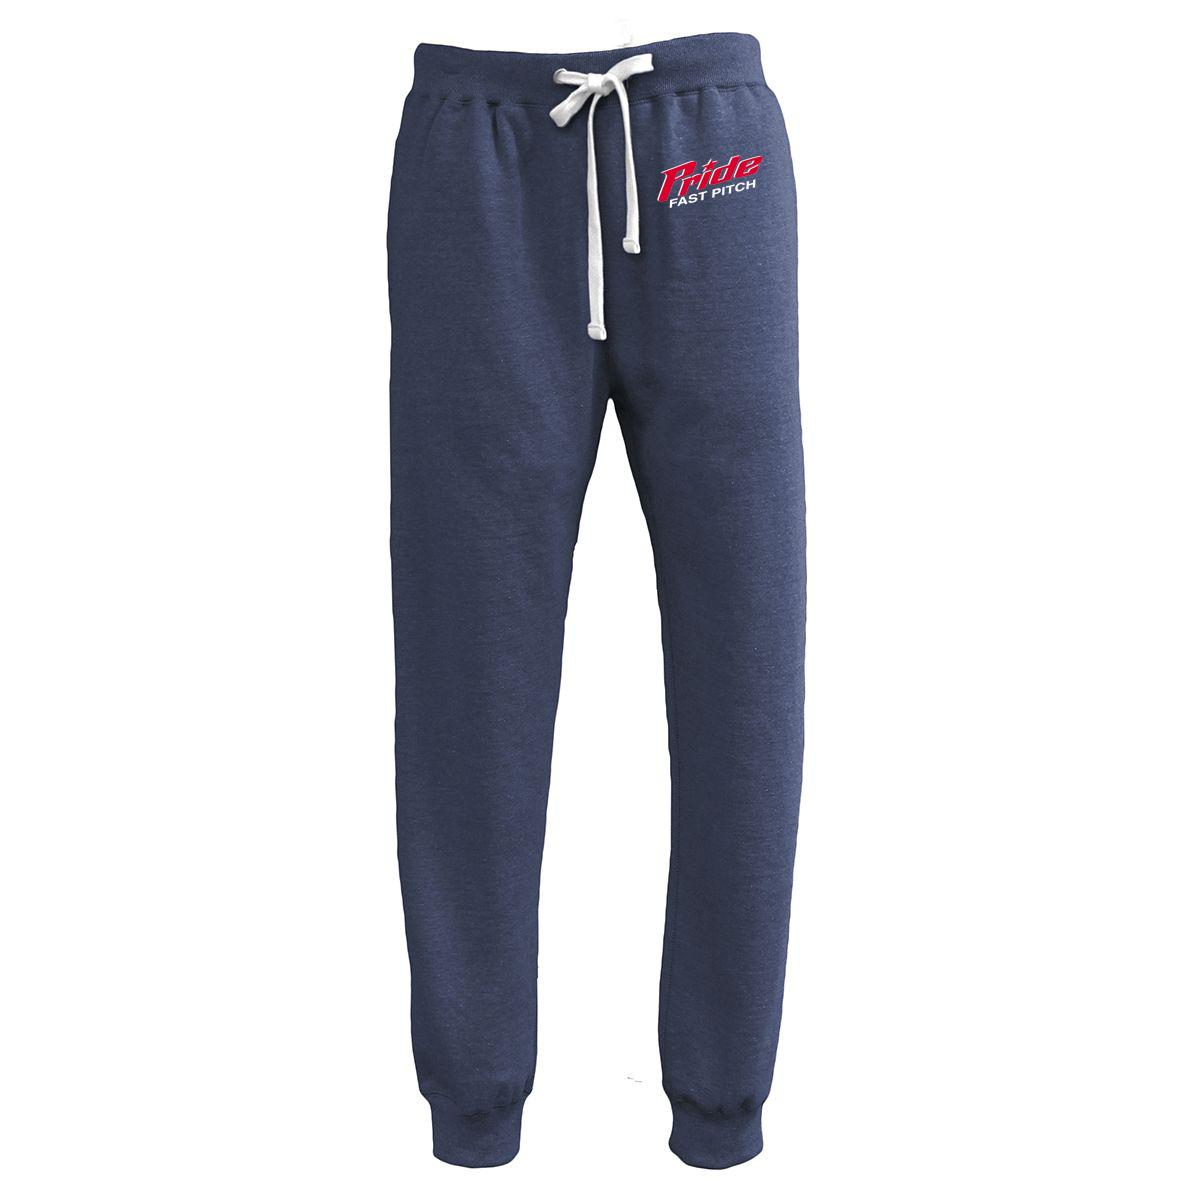 Long Island Pride Fastpitch Joggers